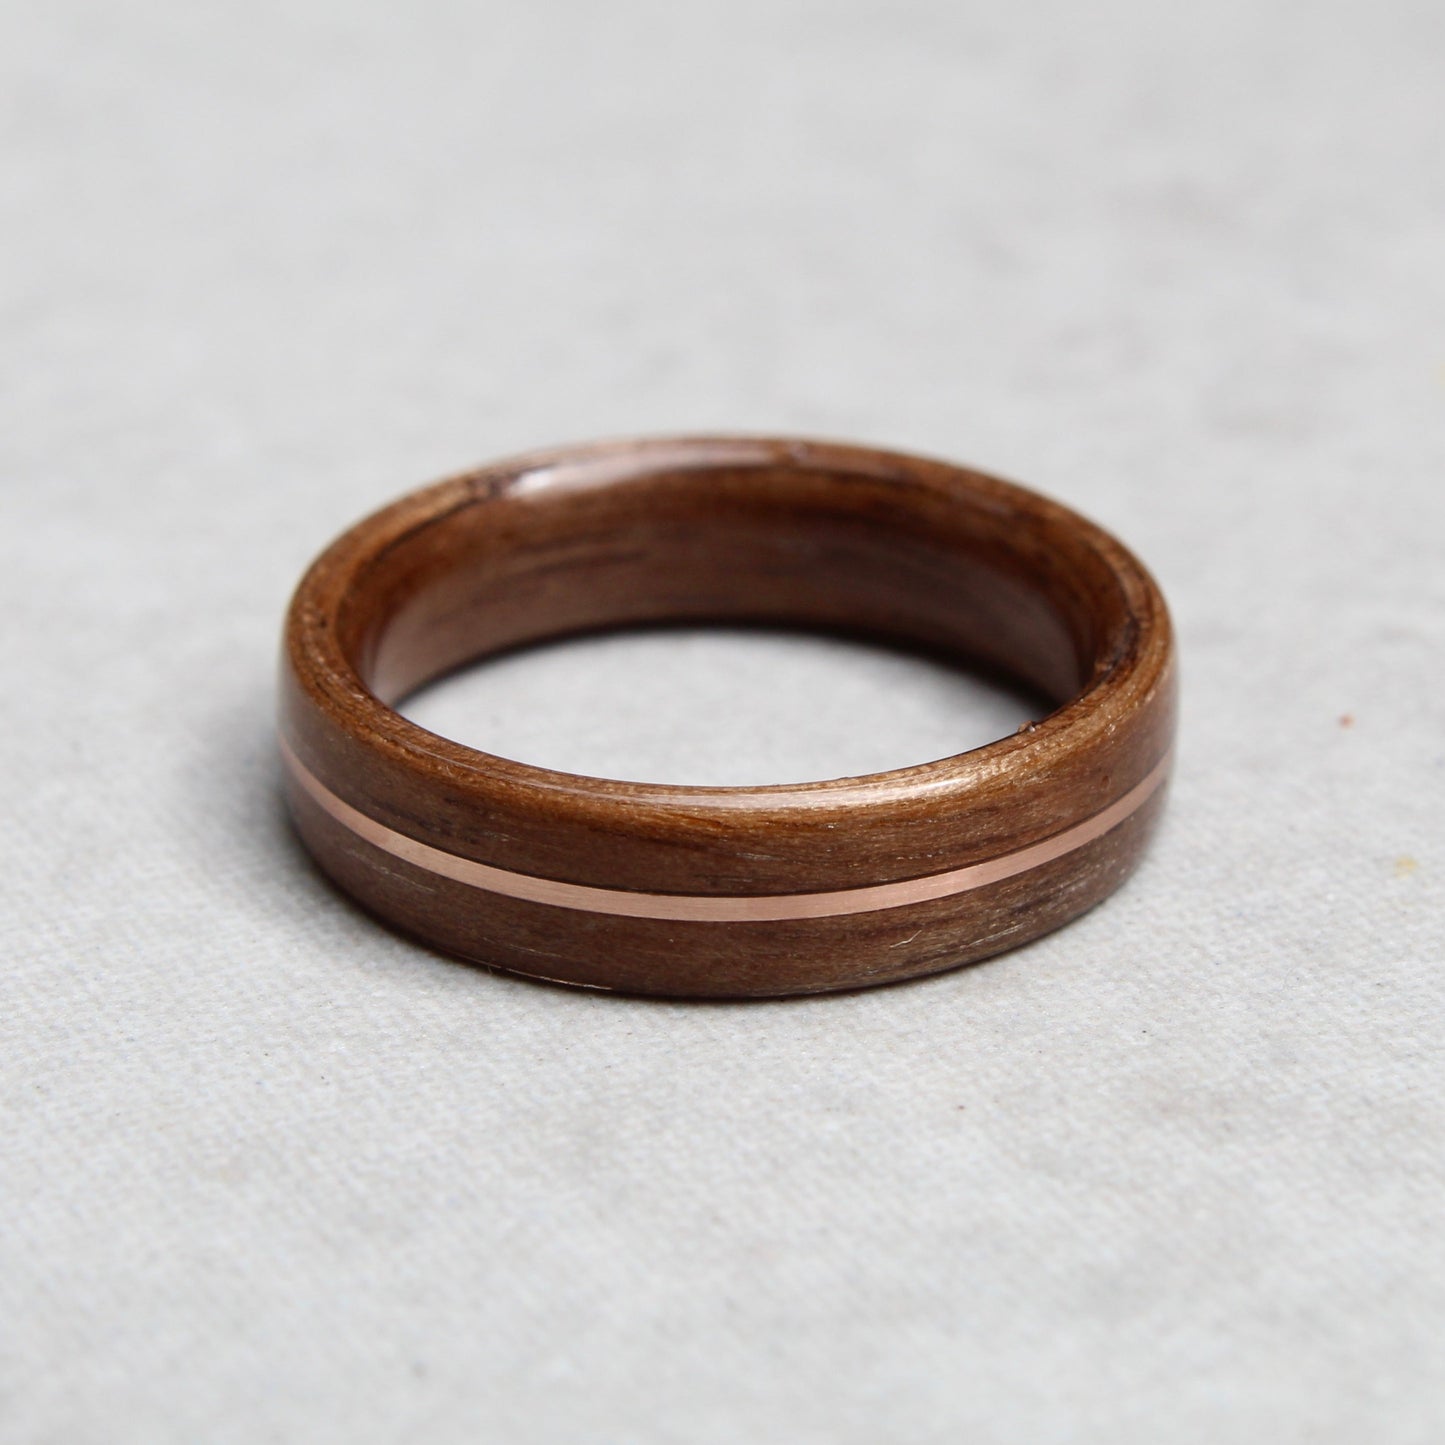 Walnut and gold ring